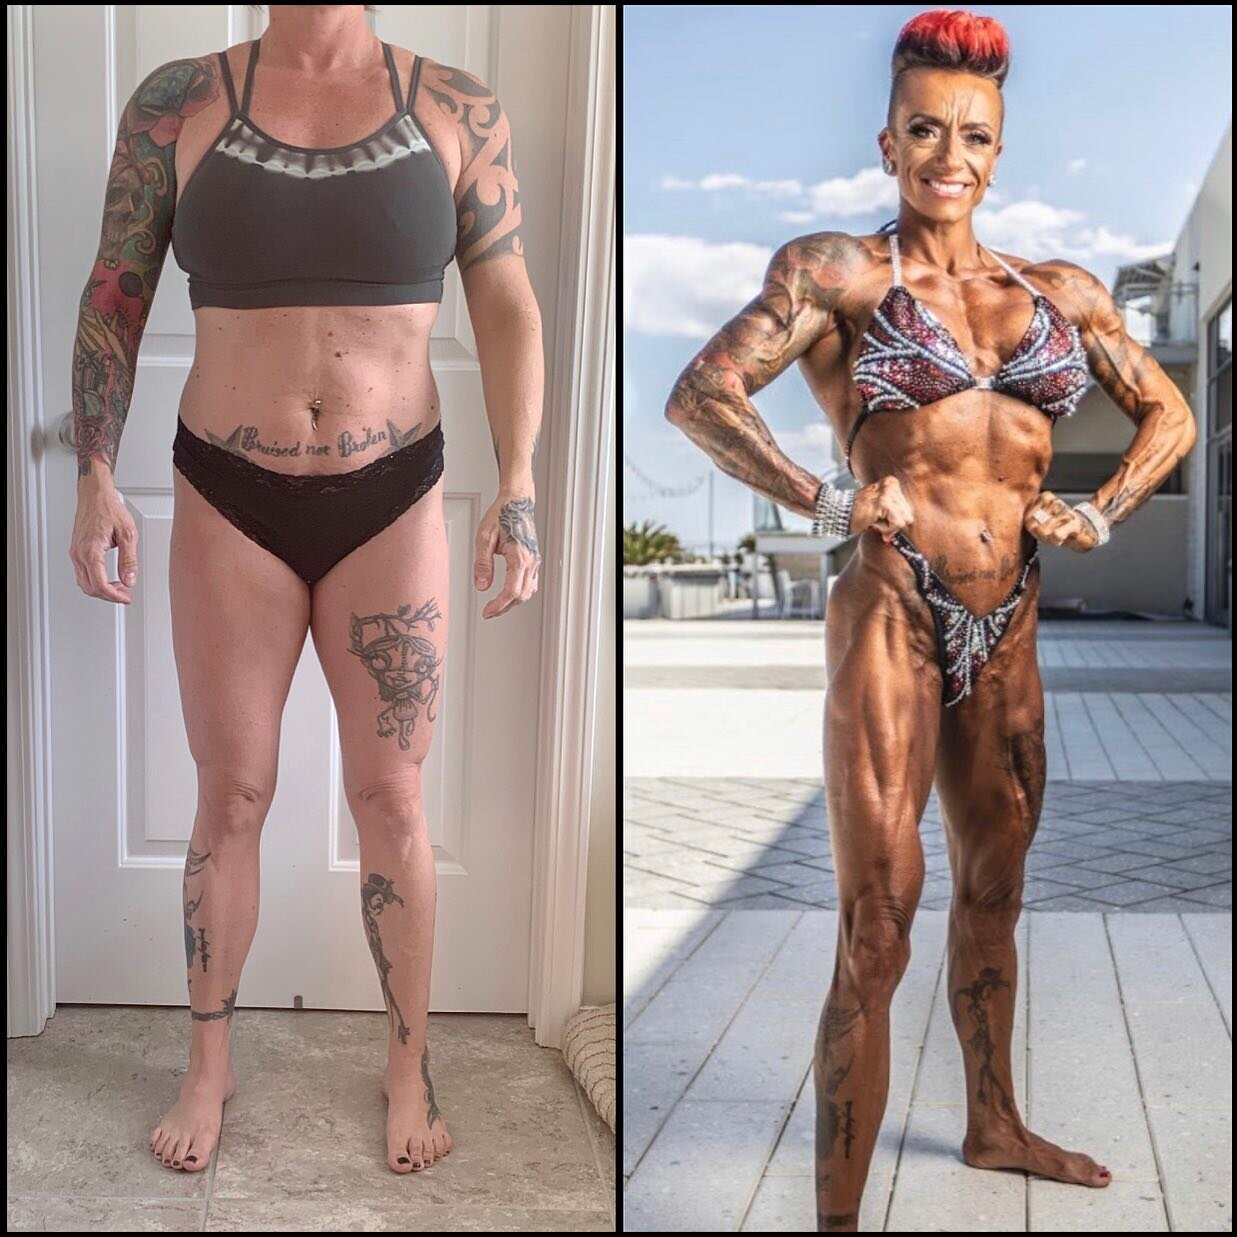 Congrats to @inkedchick on competing in her first show this past weekend at the NPC Daytona Beach Classic. Anik walked away with a first place in true novice, novice, and her masters class. She came in second in the open.
➖
Anik started almost exactl